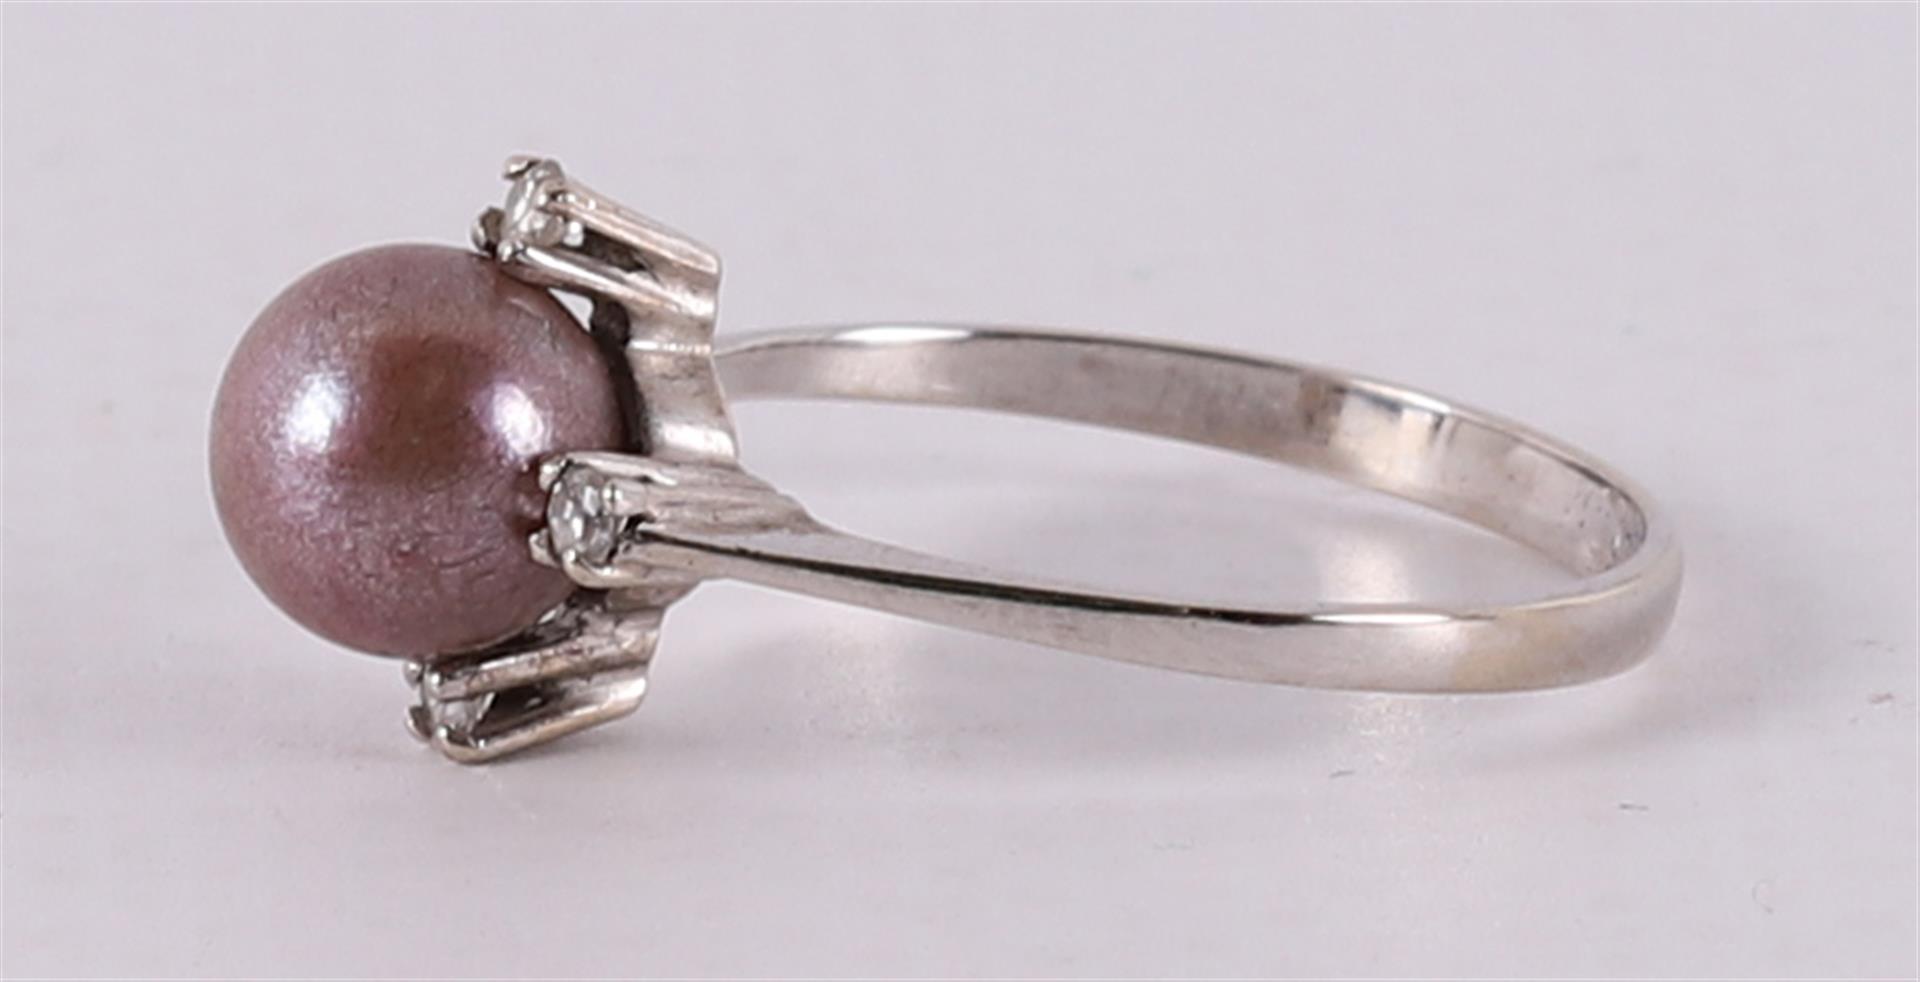 A 14 kt white gold women's ring, set with a pearl and four diamonds - Image 2 of 2